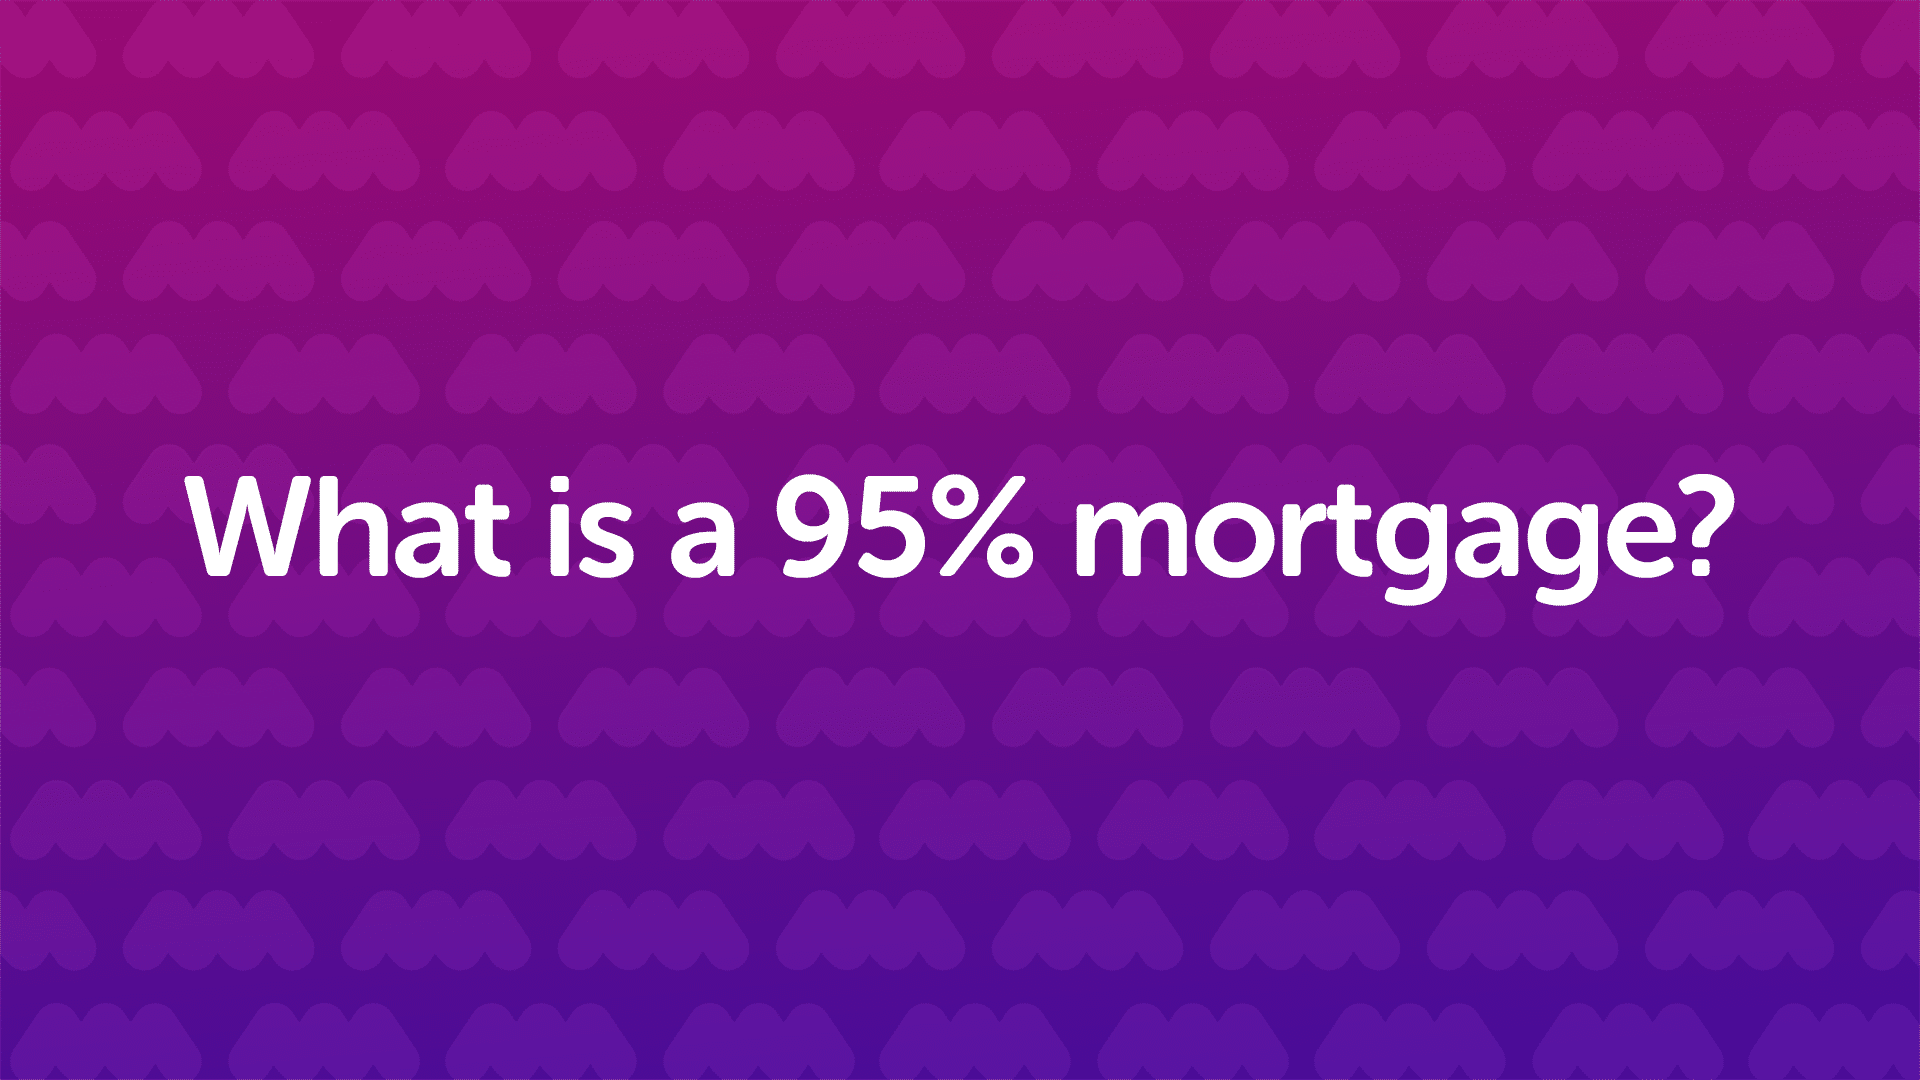 What is a 95% mortgage